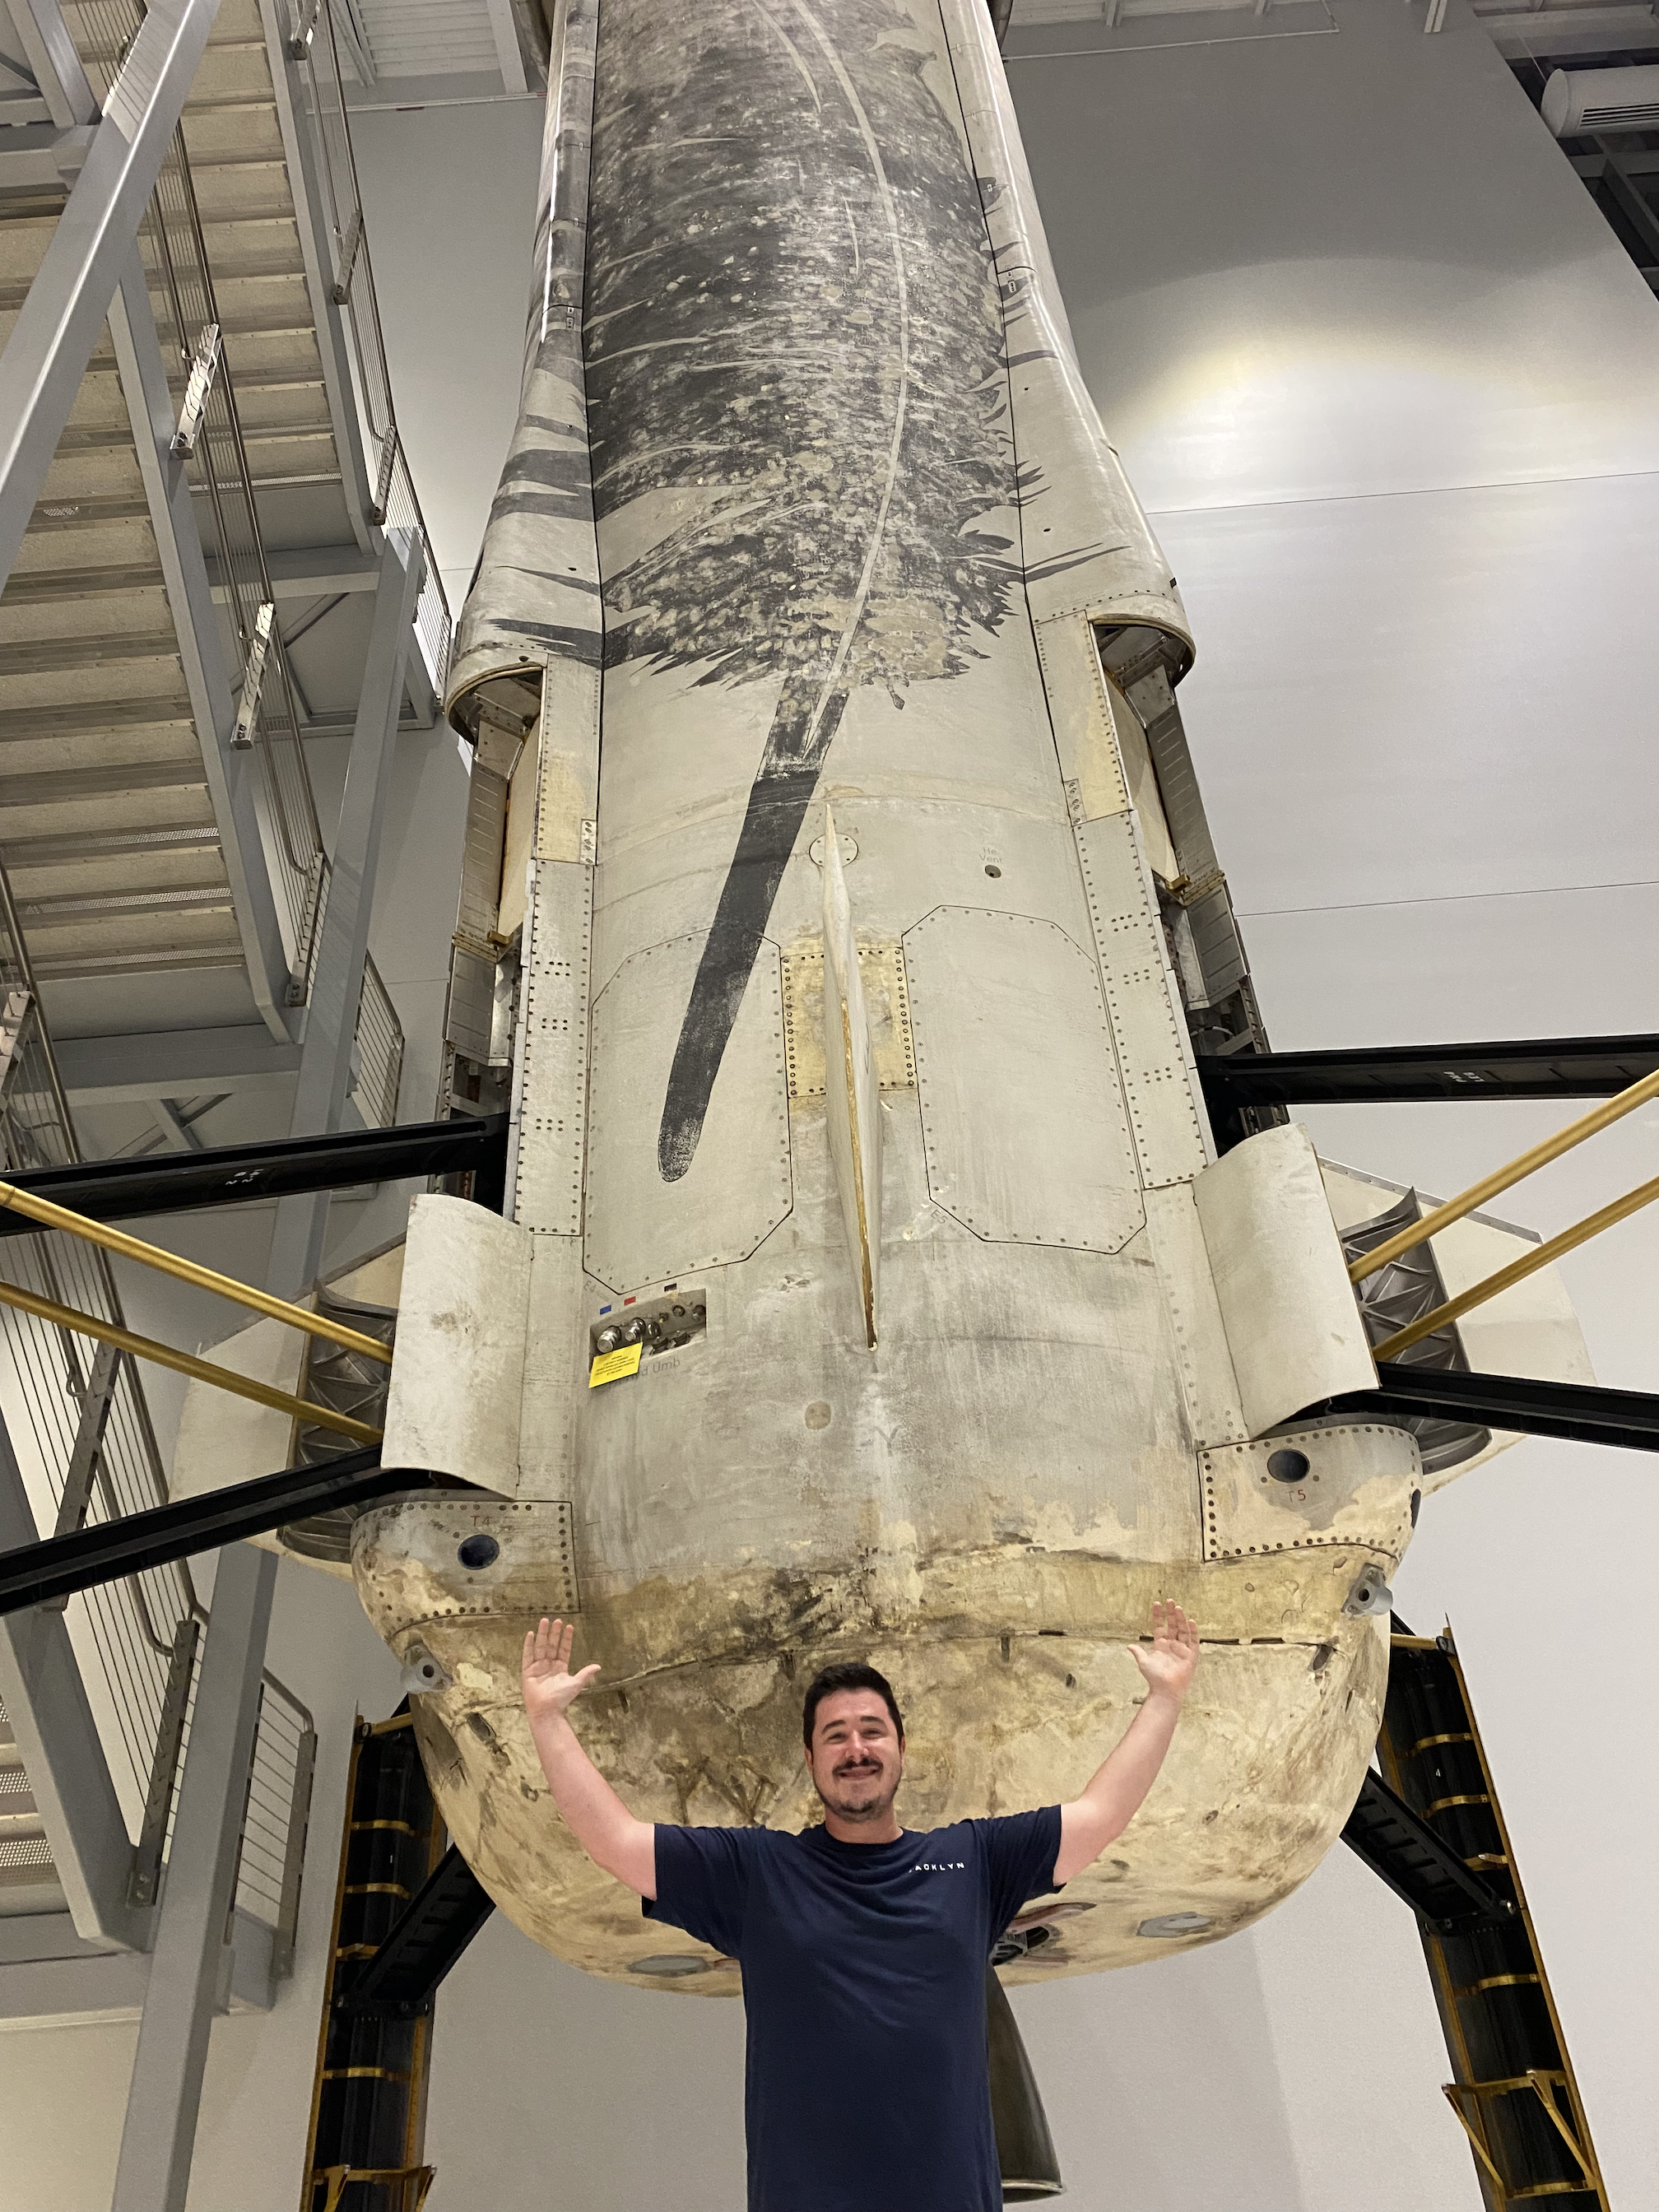 ARCS Scholar Samuel Buckner poses in front of a previously flown New Shepard rocket booster 